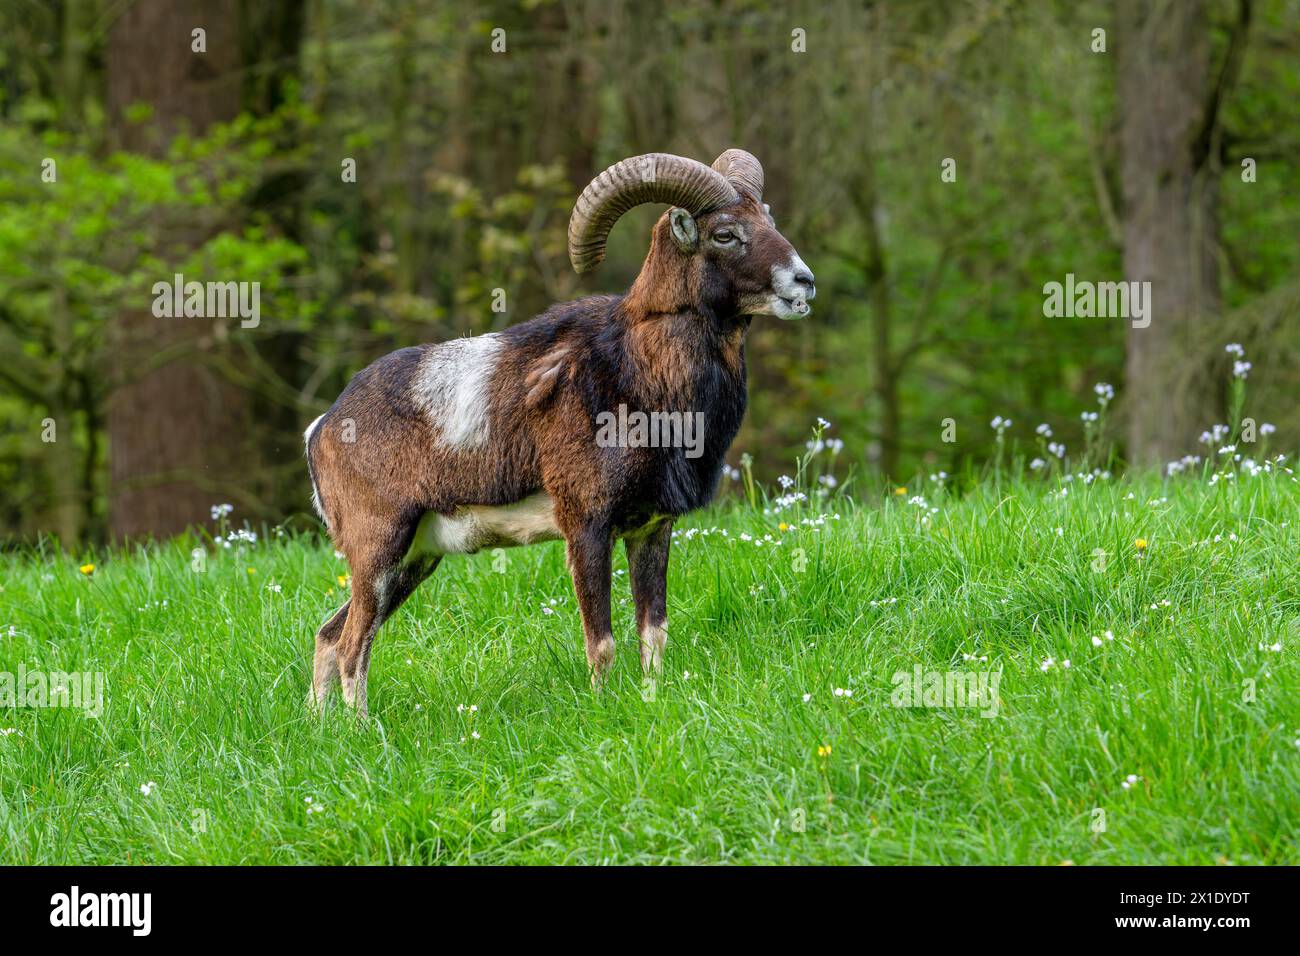 European mouflon (Ovis aries musimon / Ovis gmelini musimon) ram / male with big horns at in meadow at forest’s edge in spring Stock Photo